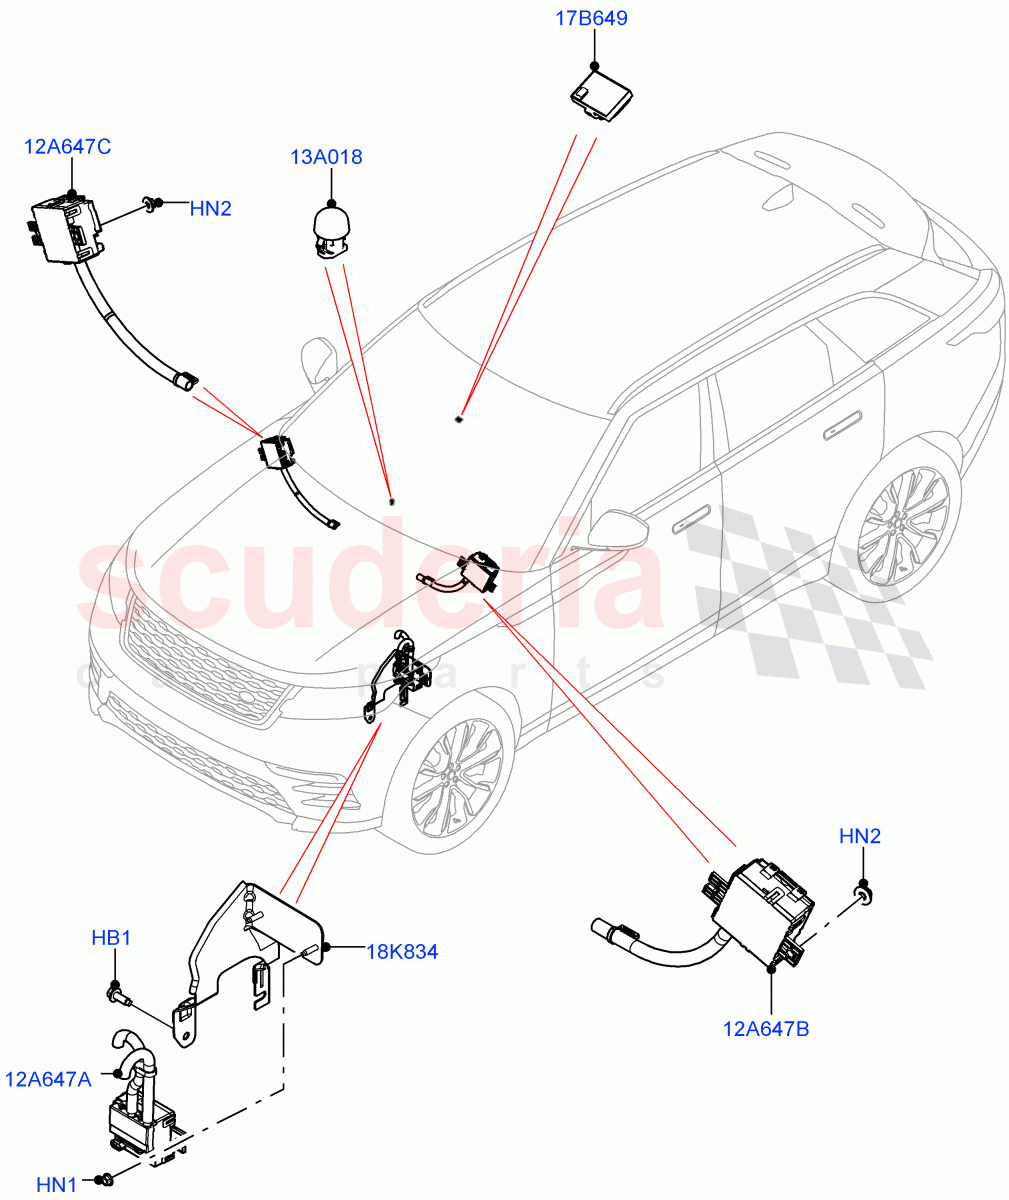 Air Conditioning And Heater Sensors((V)FROMNA000001) of Land Rover Land Rover Range Rover Velar (2017+) [3.0 DOHC GDI SC V6 Petrol]